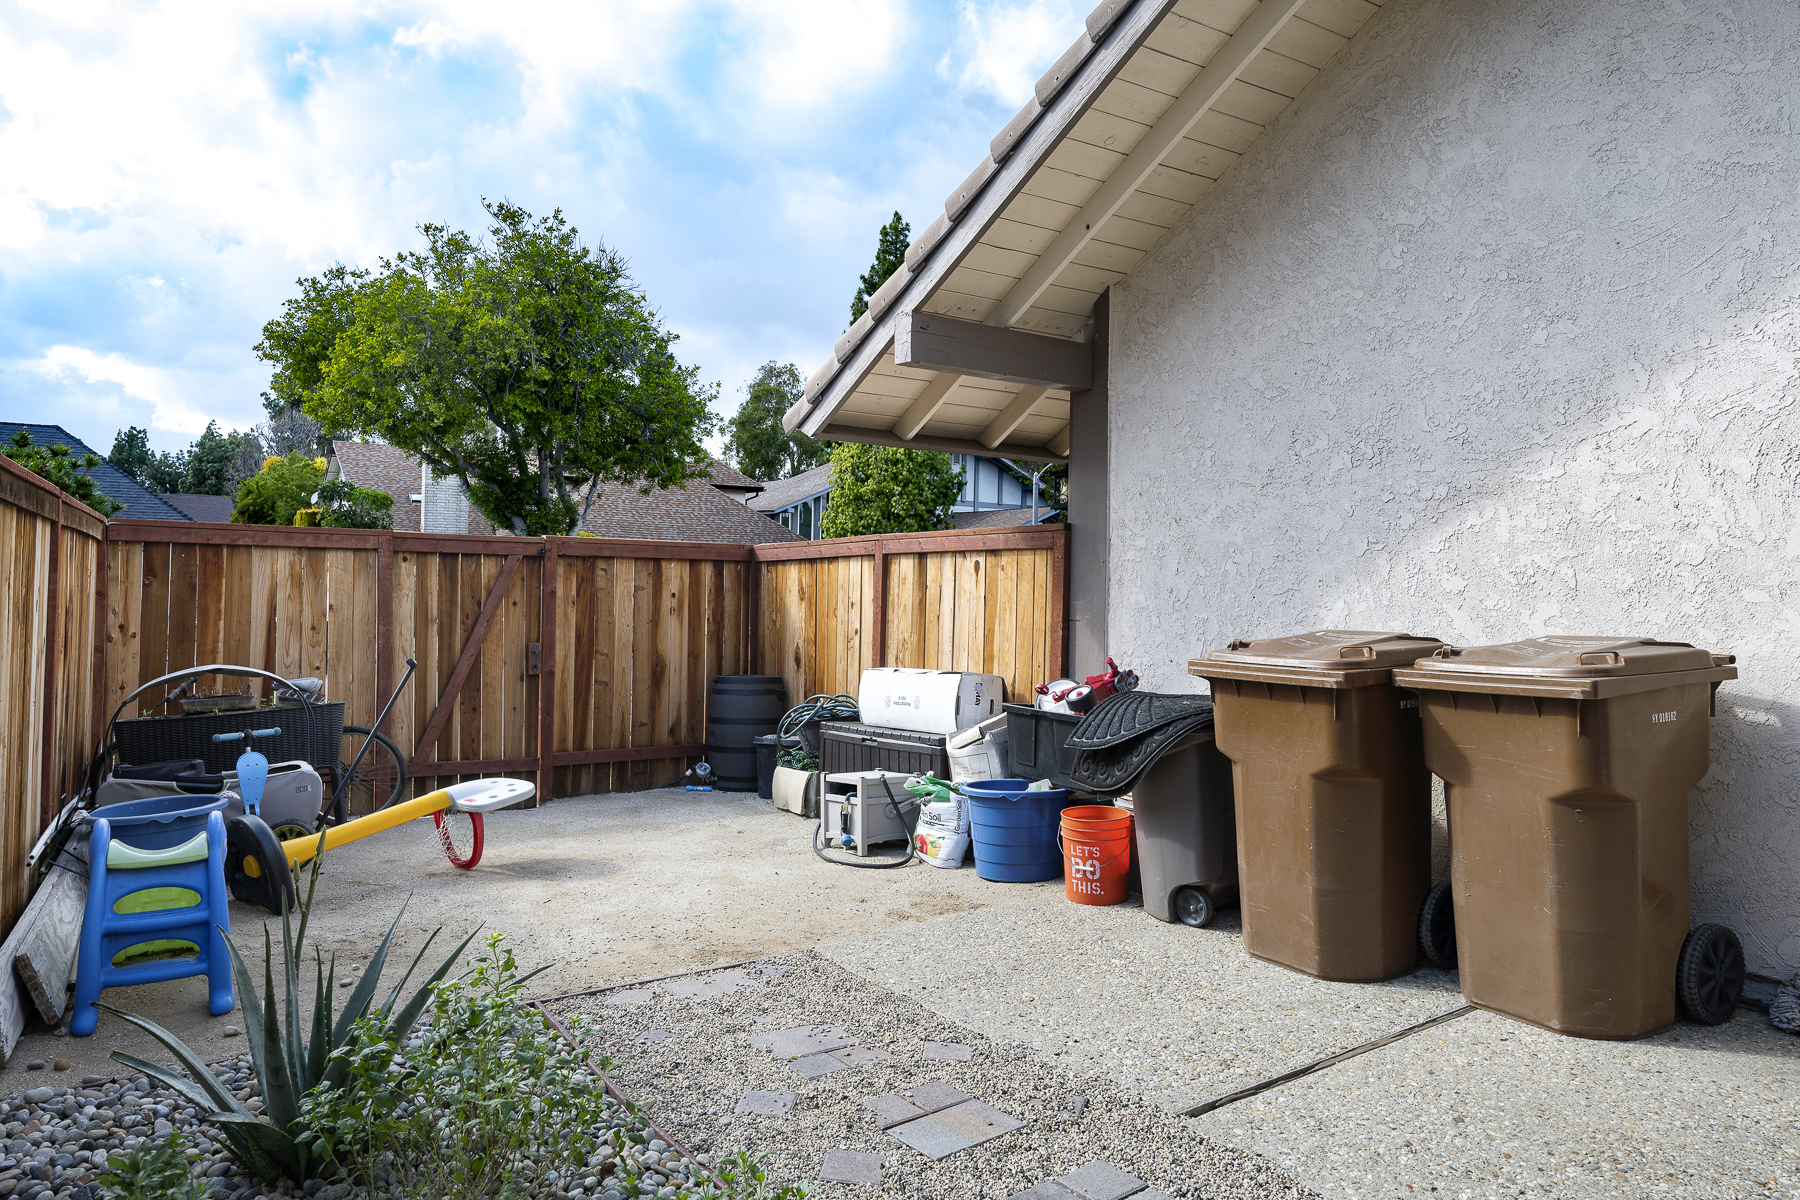 Outdoors storage area with trash cans and latched fence entrance